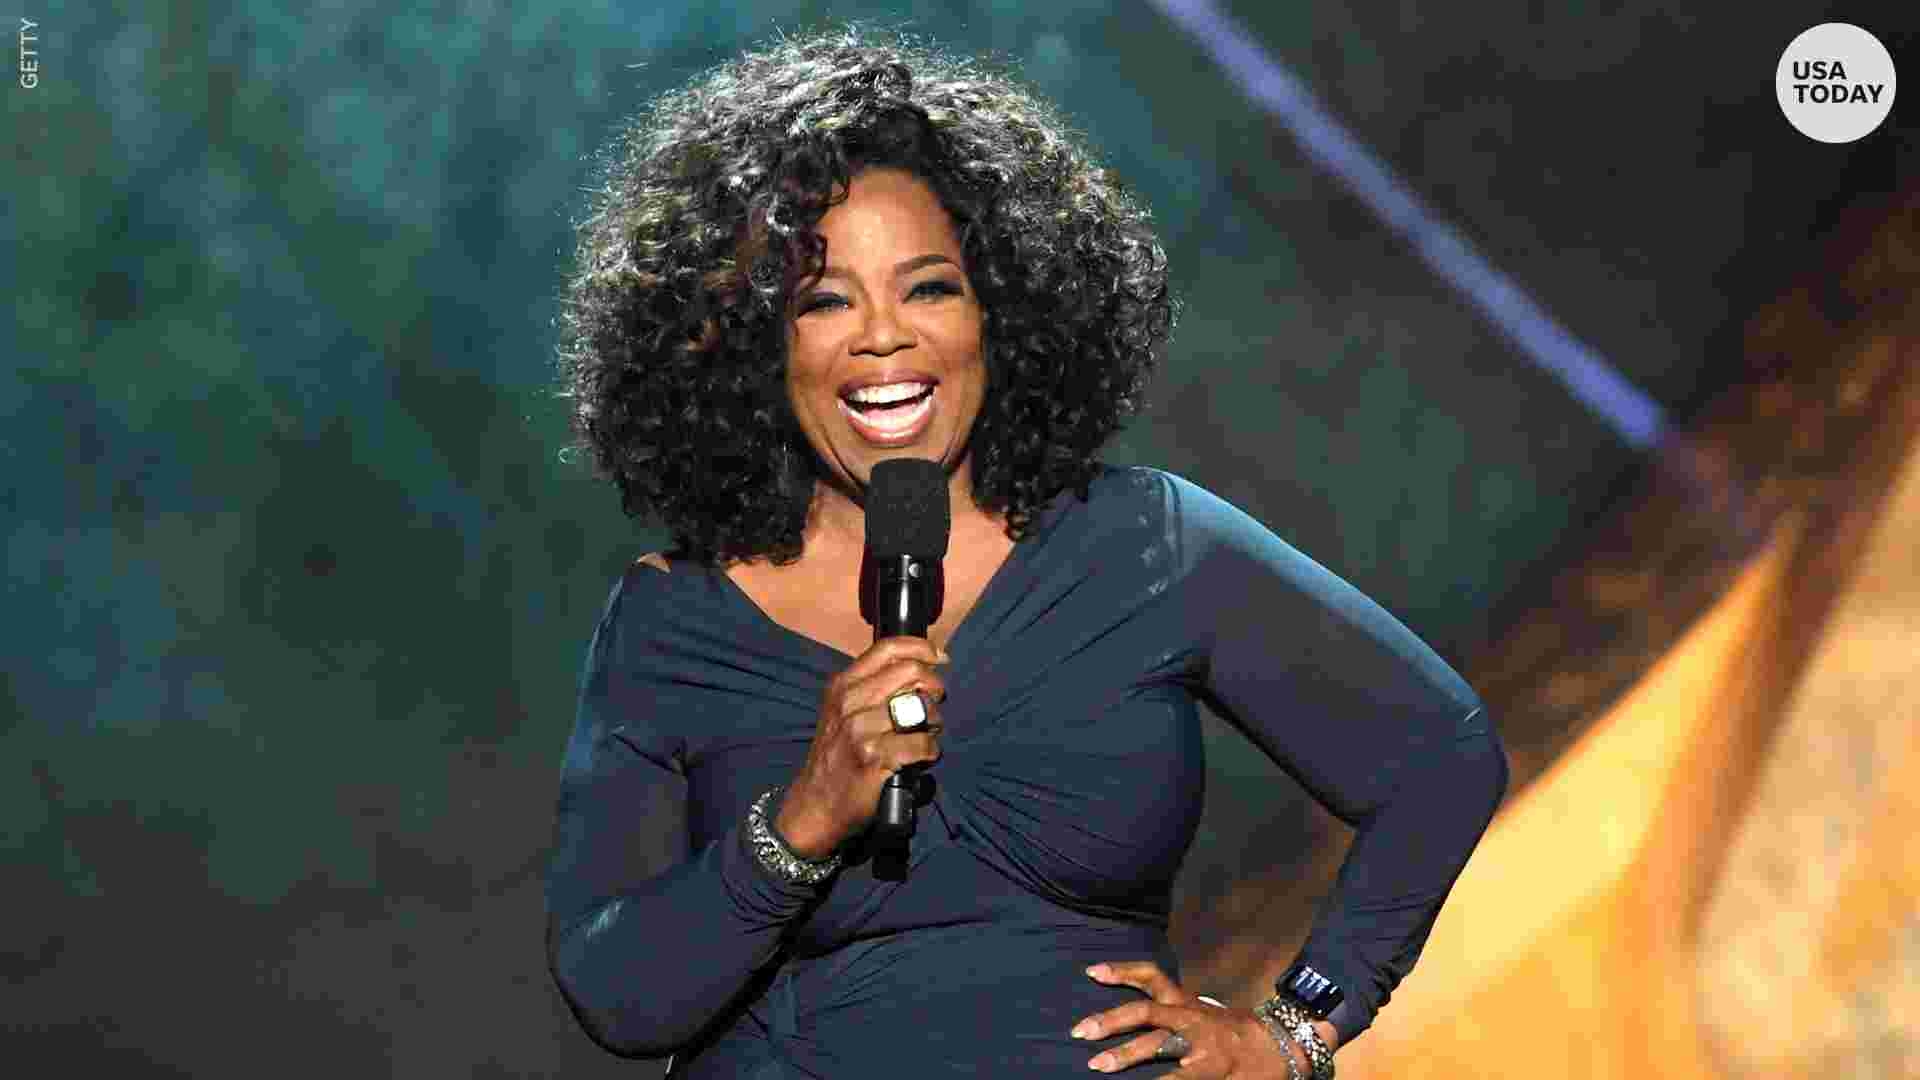 Oprah Winfrey reveals she ‘would love’ rebooting her daytime talk show